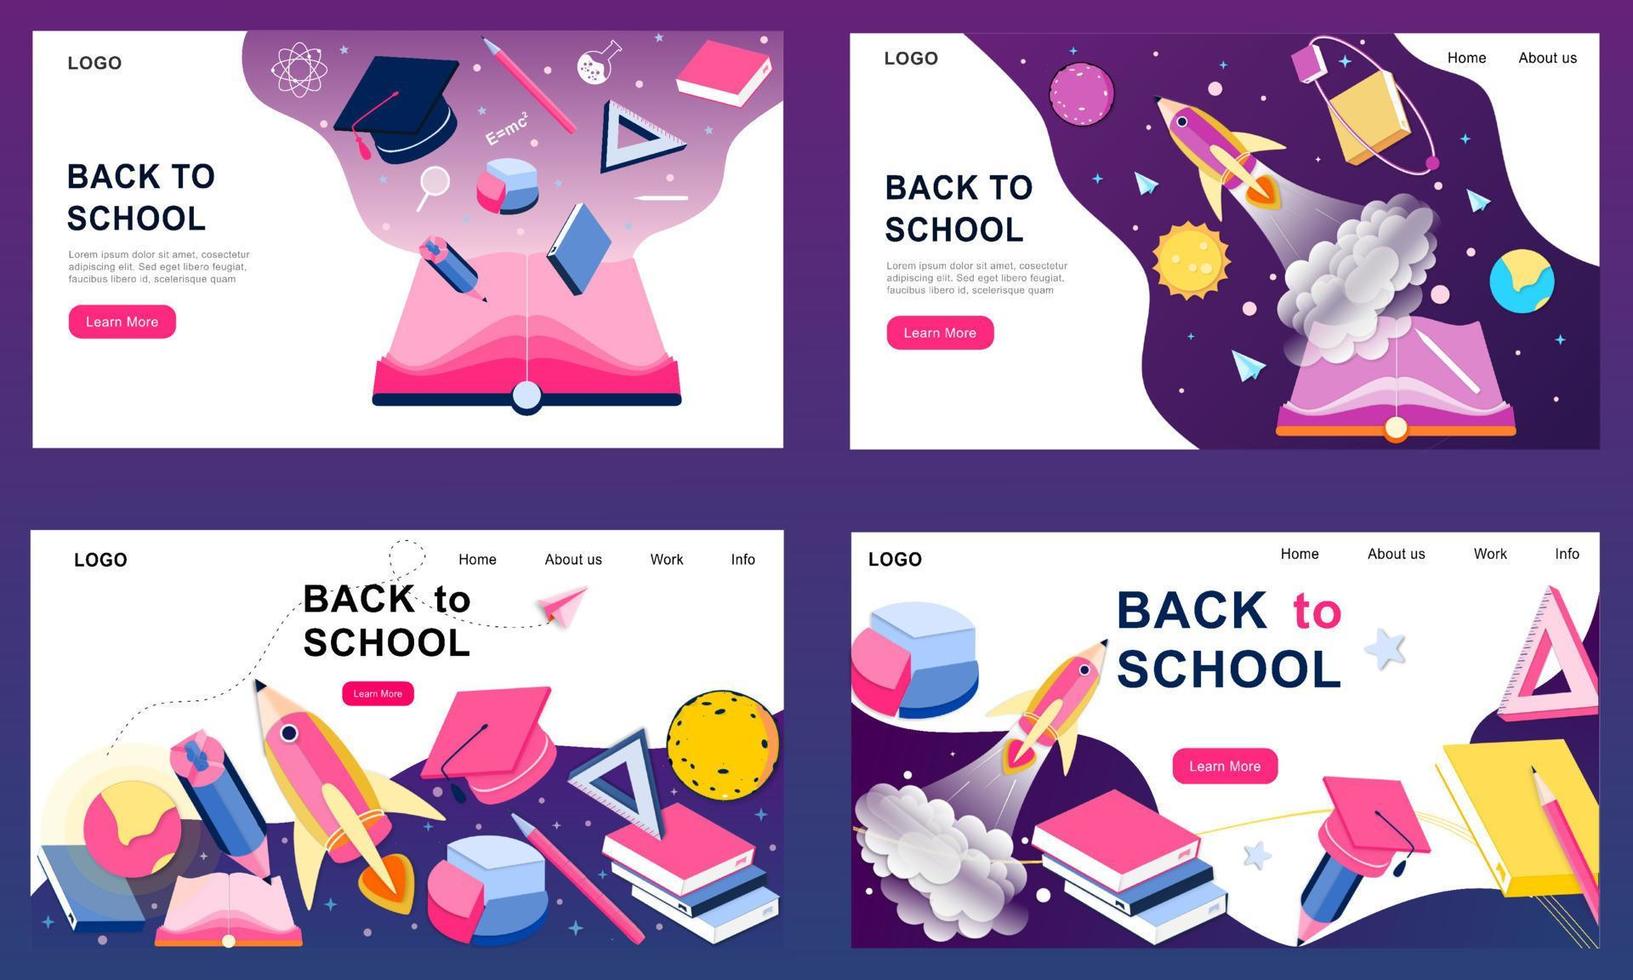 Set of 3d landing page design templates for back to school, course, class, education in galaxy space imagination. Modern vector illustration concept for poster, banner, promotion, big sale, discount.